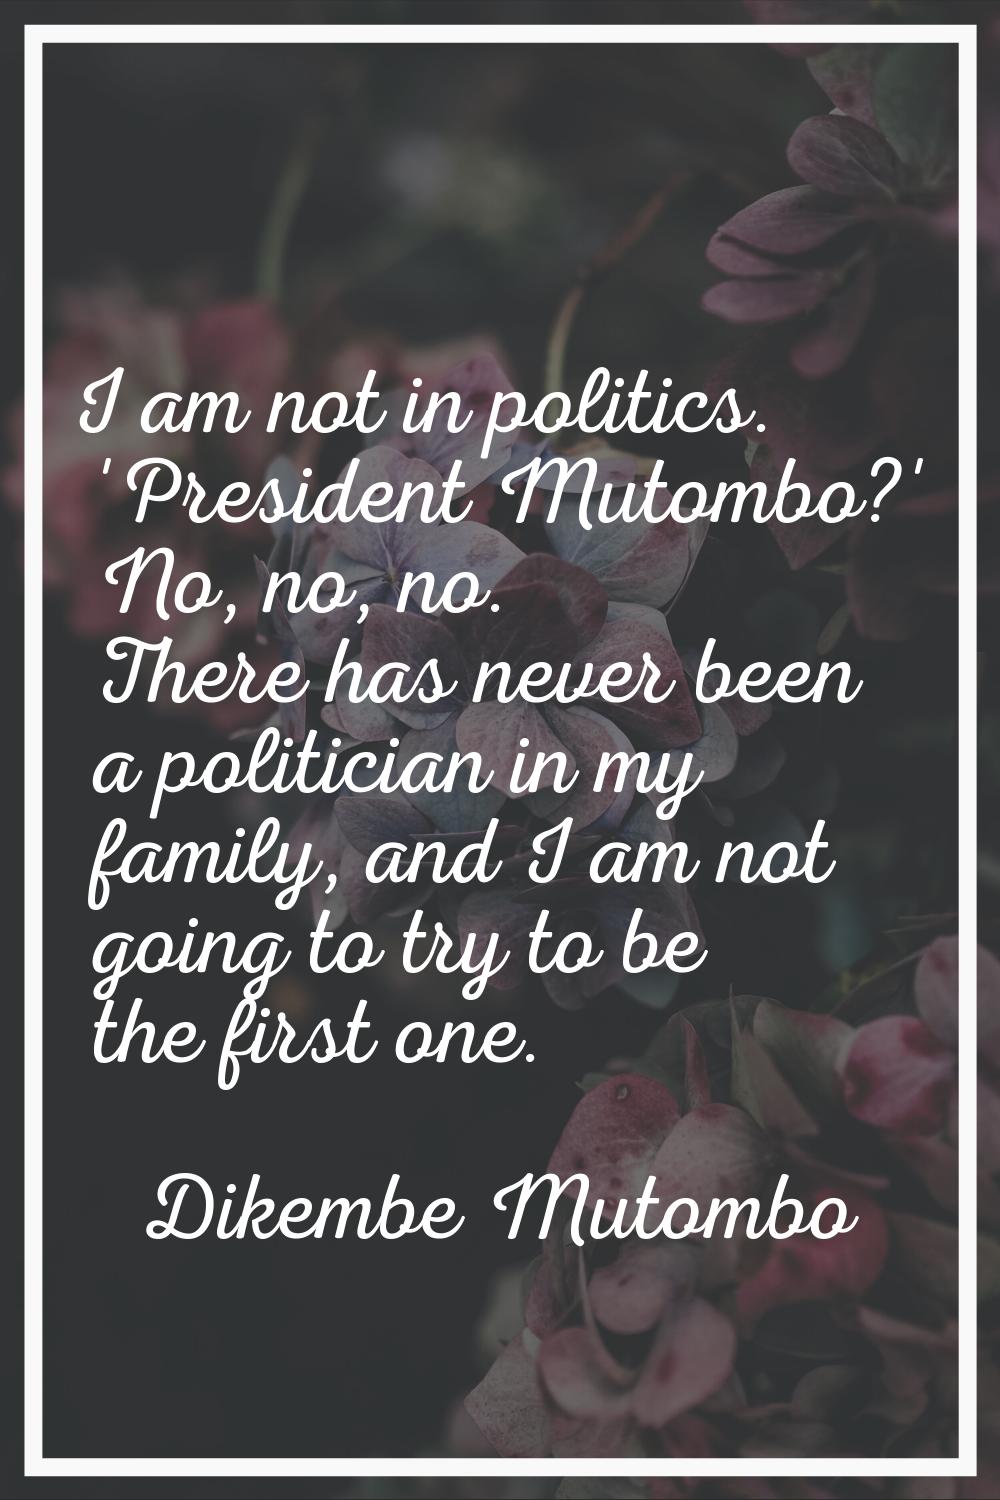 I am not in politics. 'President Mutombo?' No, no, no. There has never been a politician in my fami